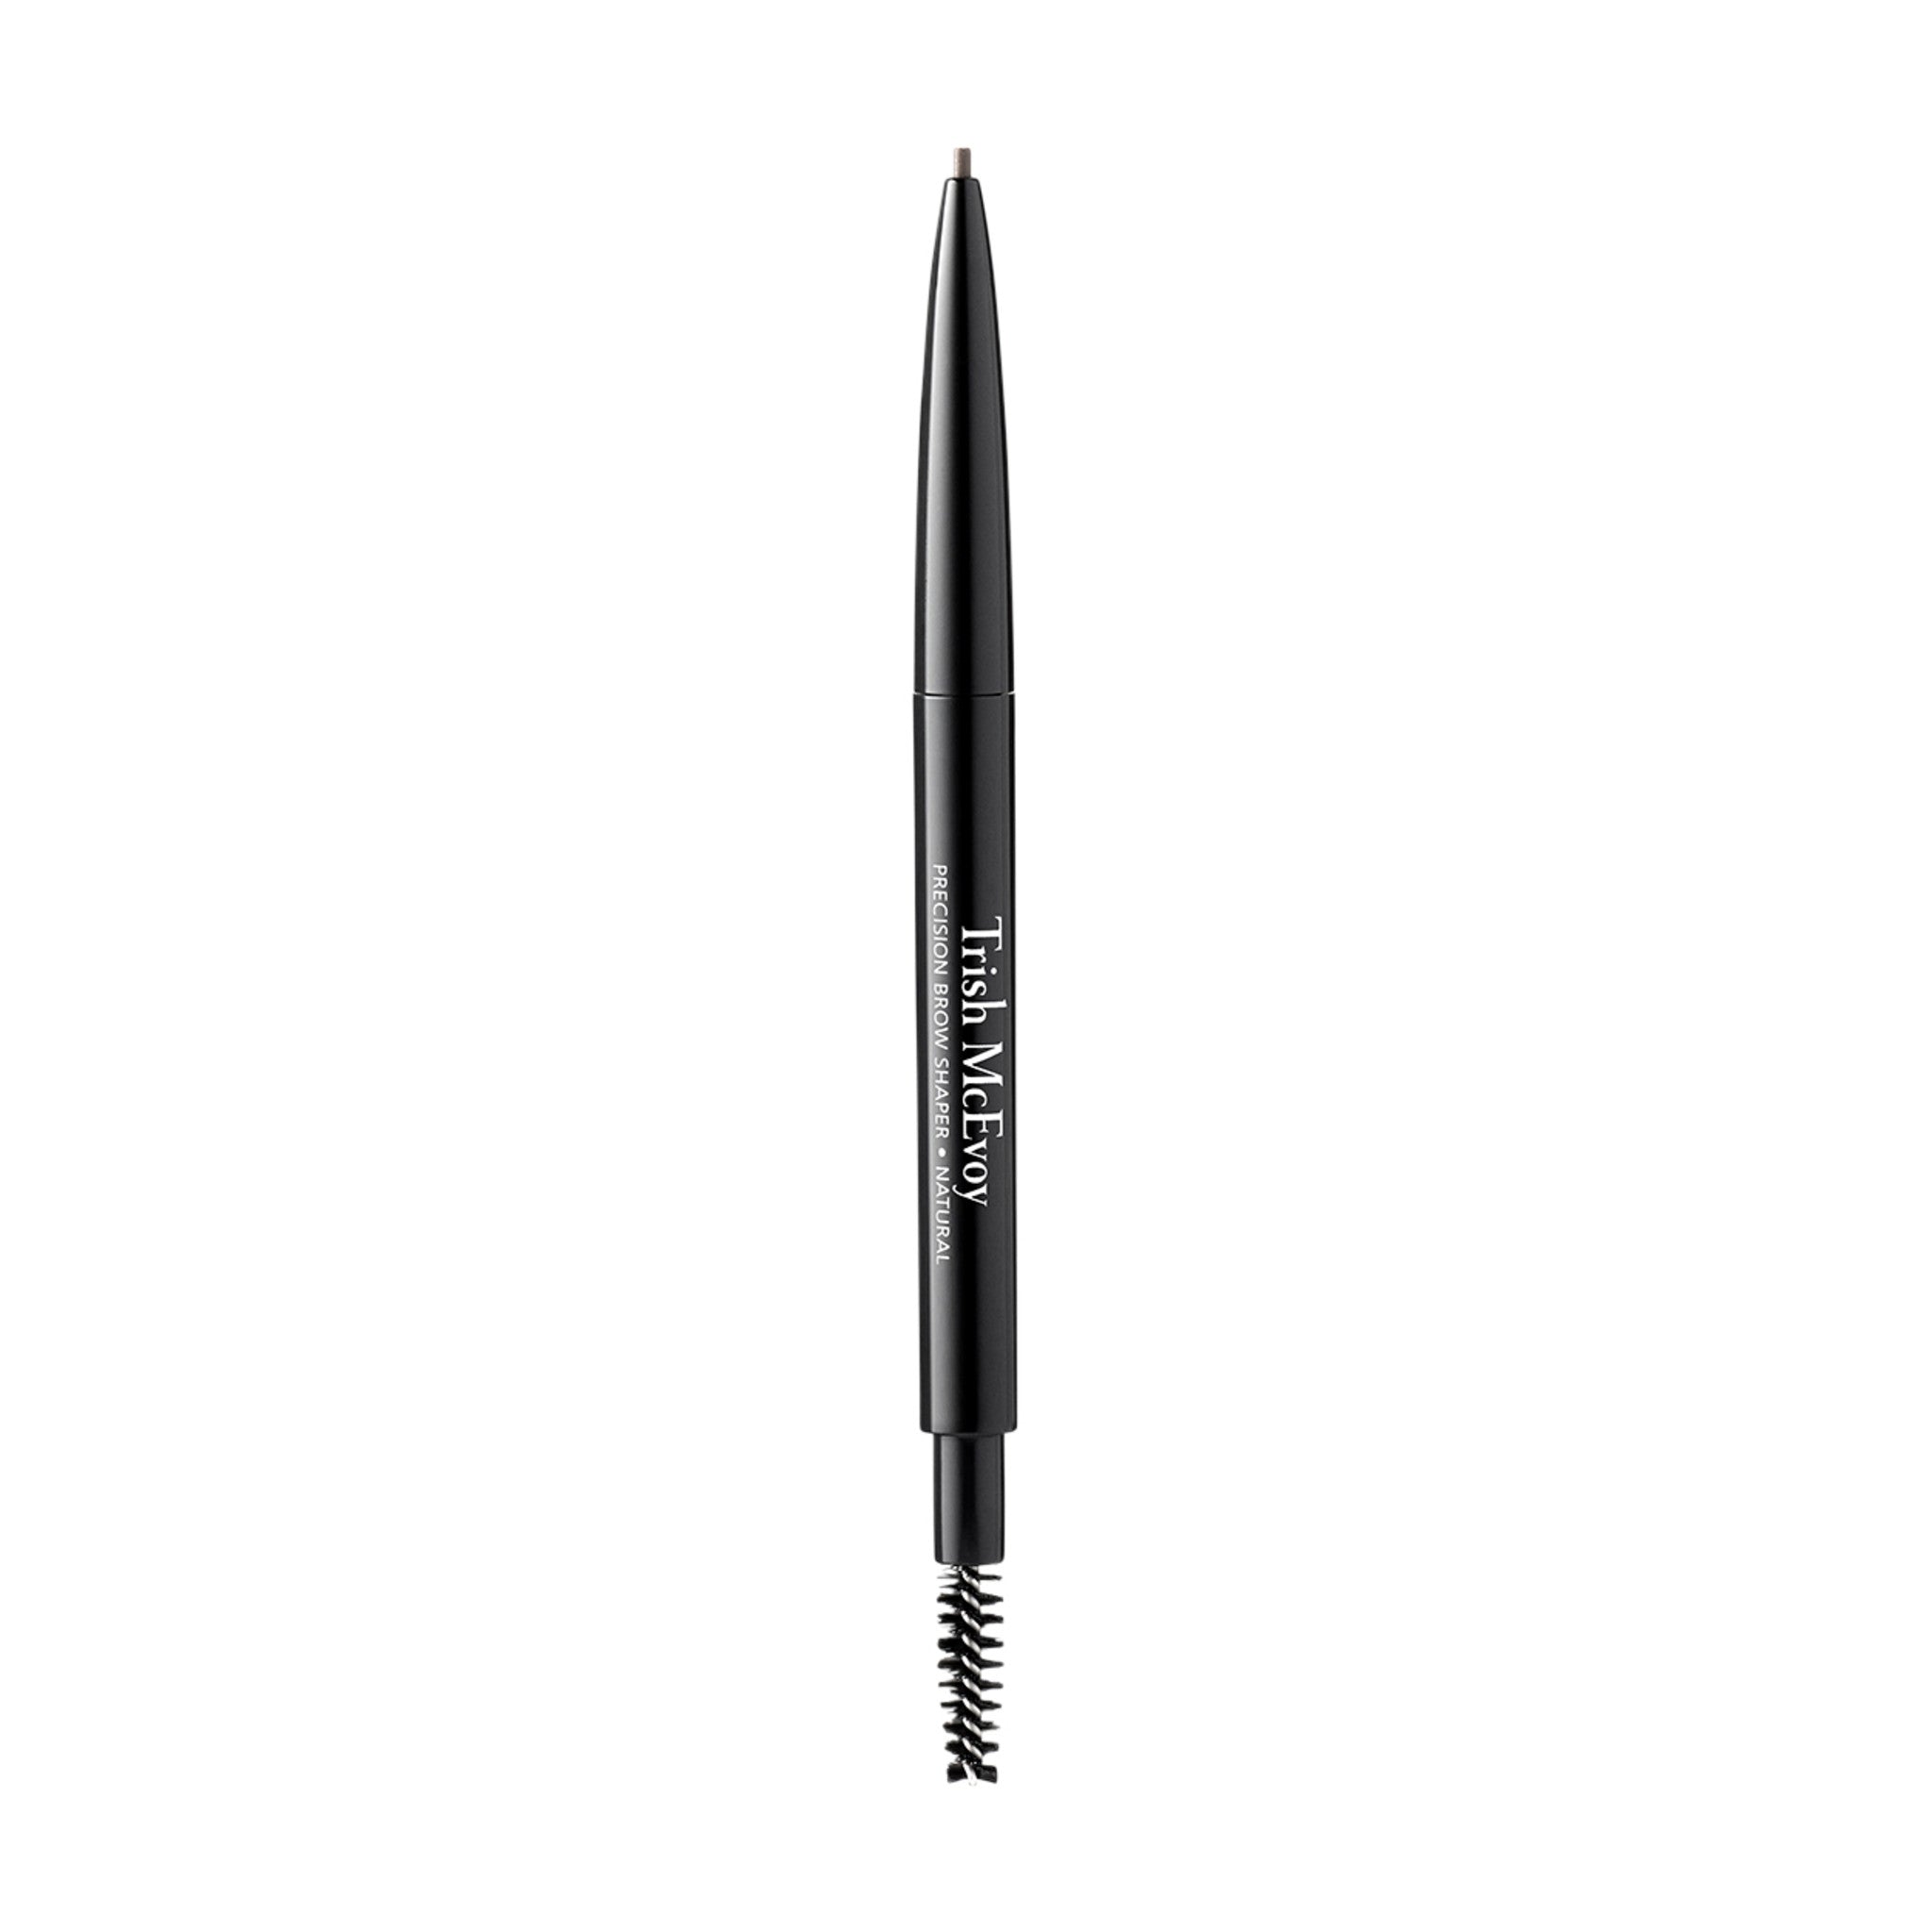 Trish McEvoy Precision Brow Shaper Color/Shade variant: Natural main image. This product is in the color nude